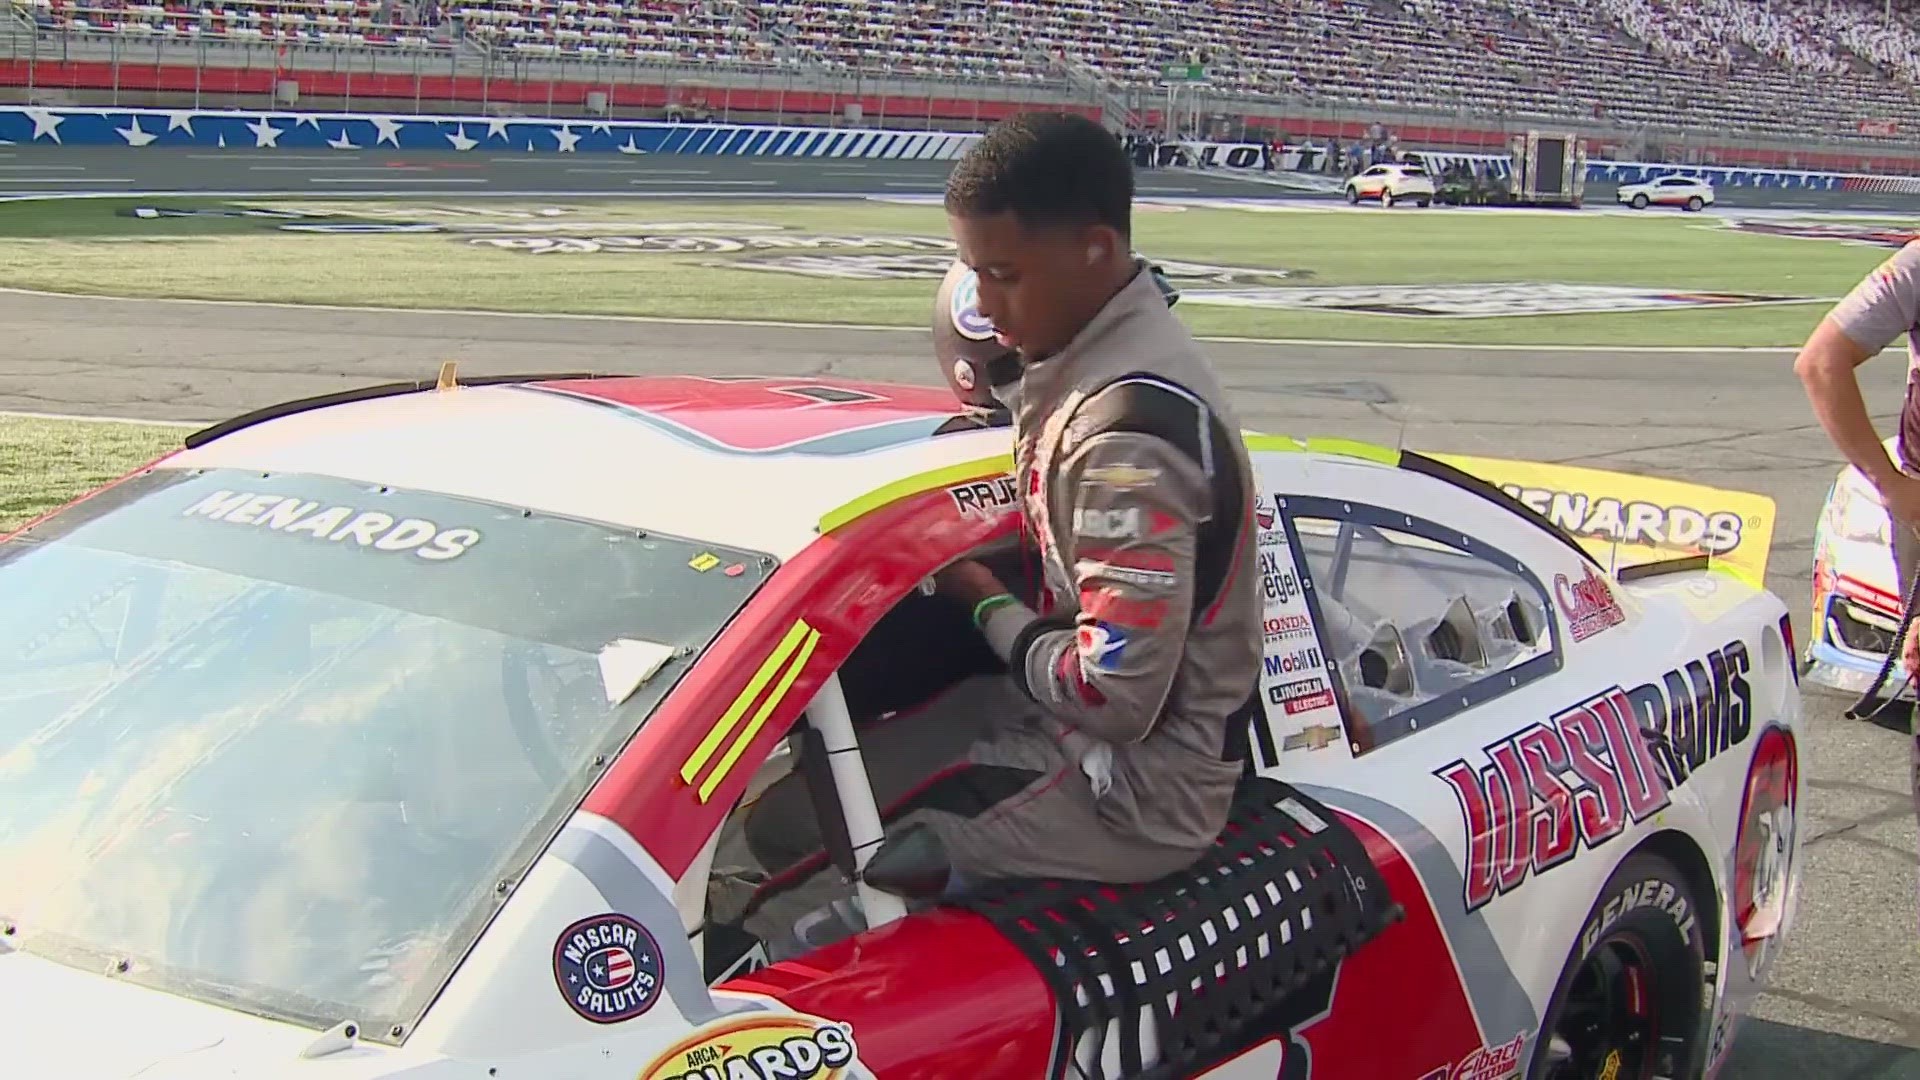 By day Rajah Caruth is a student but when class is over, he's a professional stock car driver.